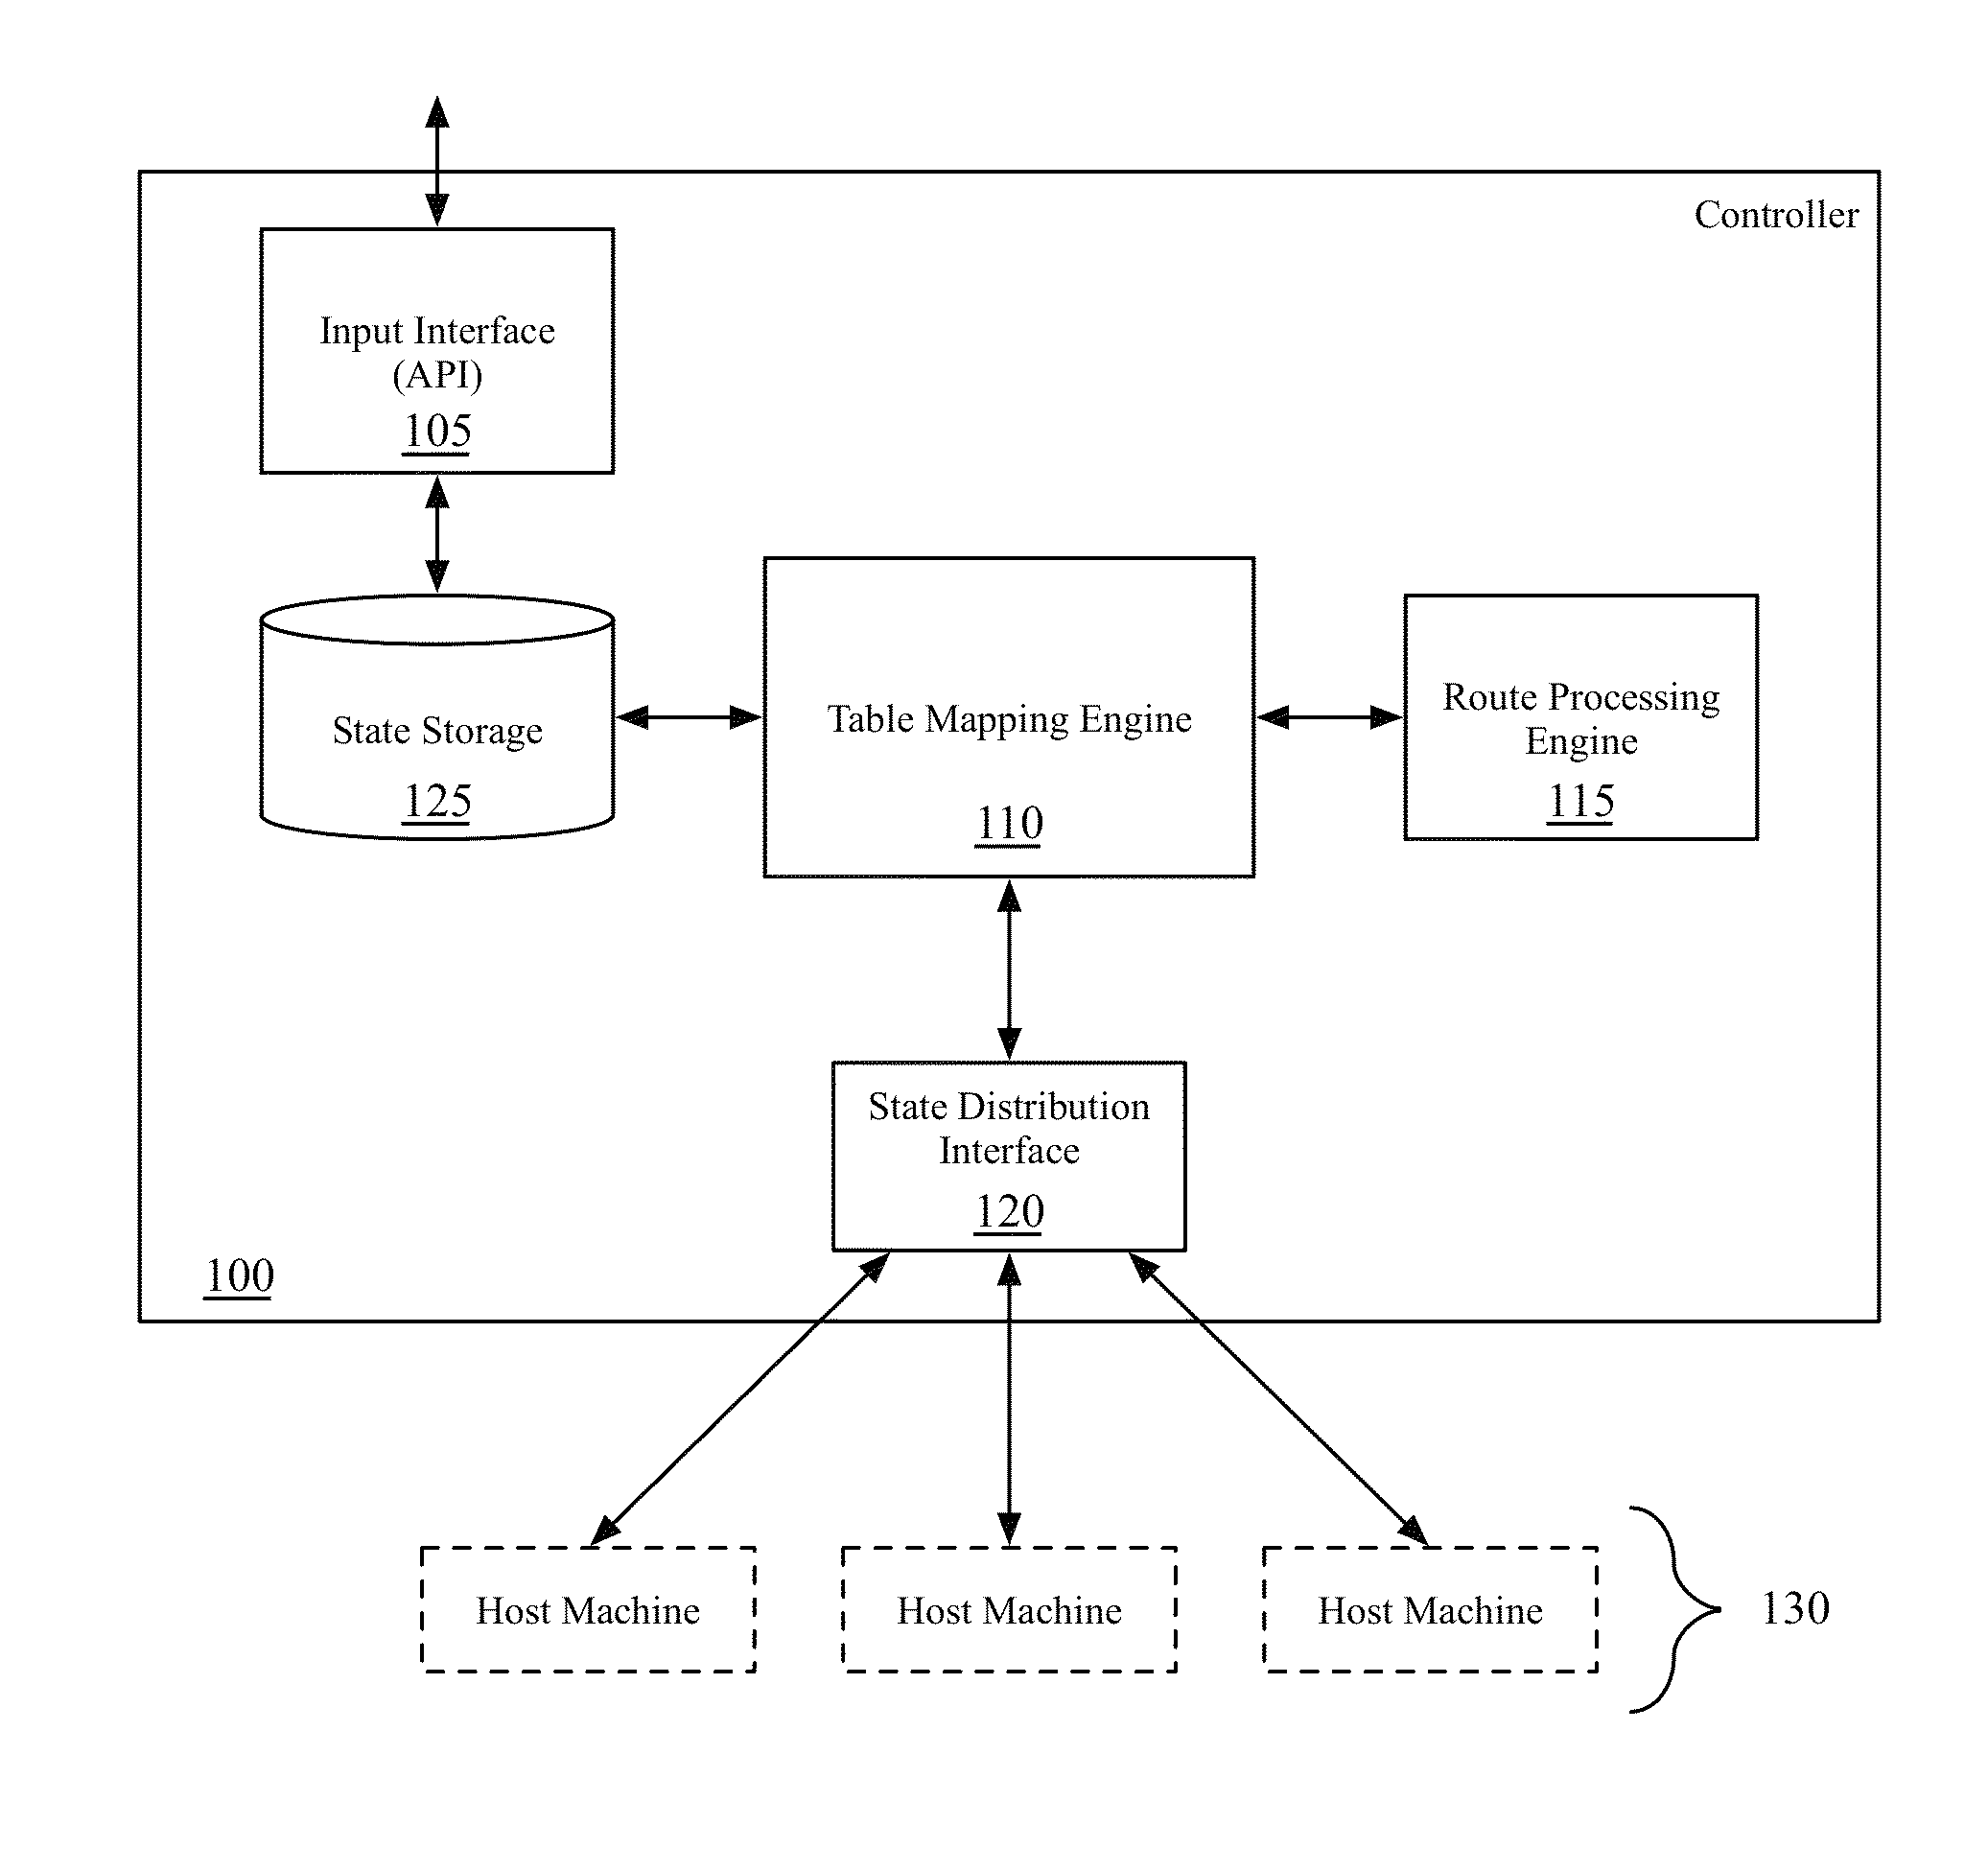 Static routes for logical routers